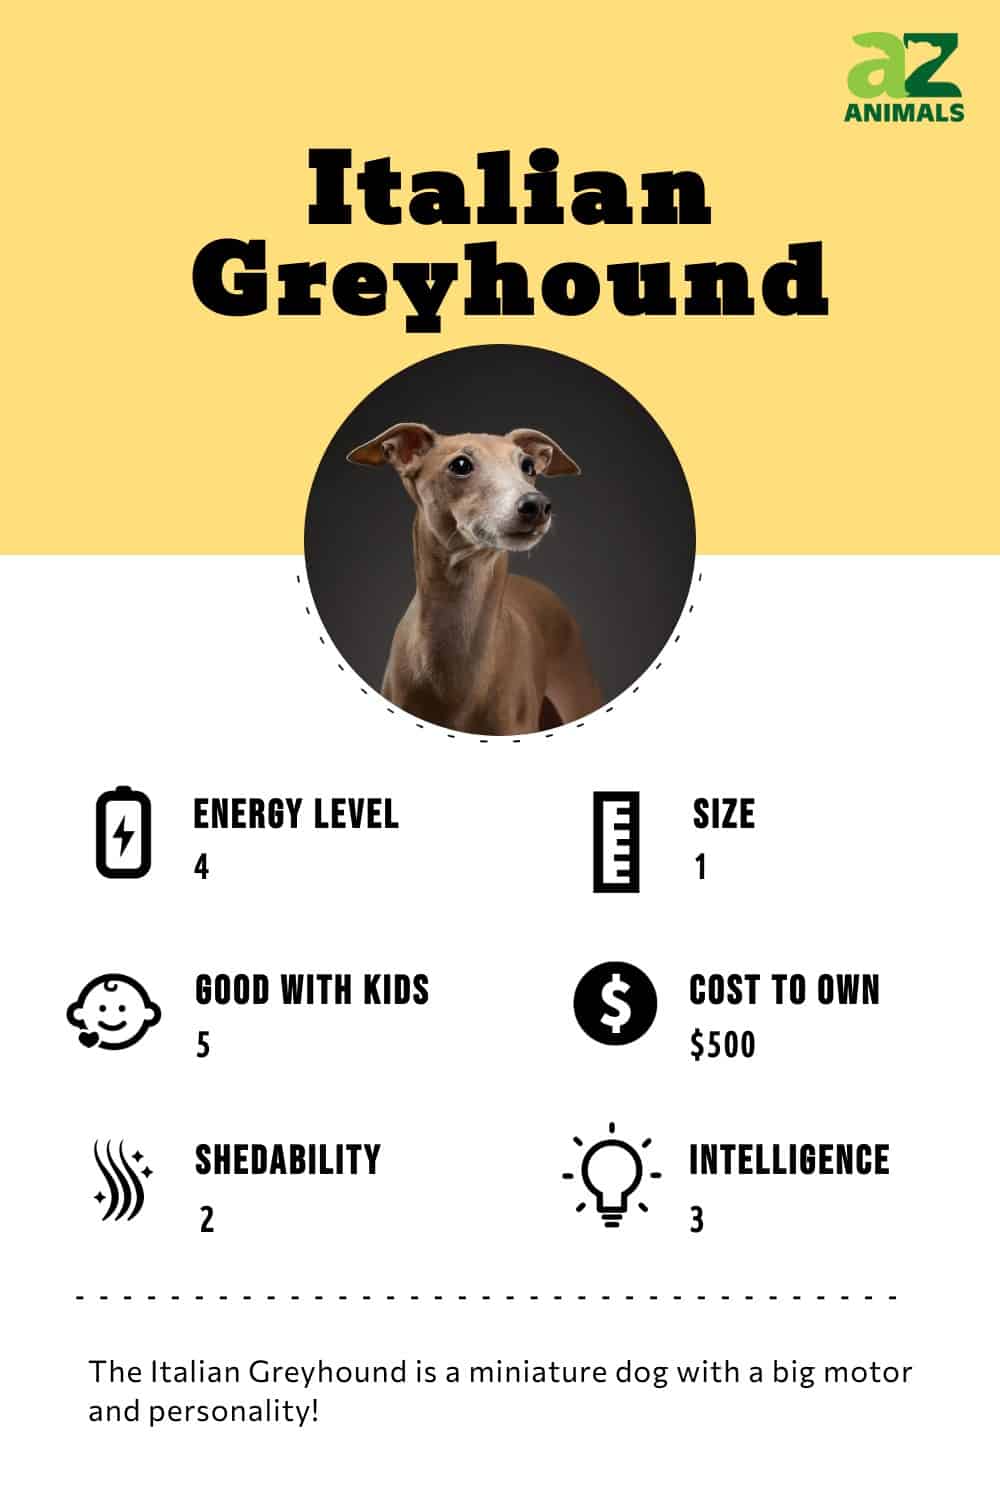 Italian Greyhound Dog Breed Complete Guide - A-Z Animals